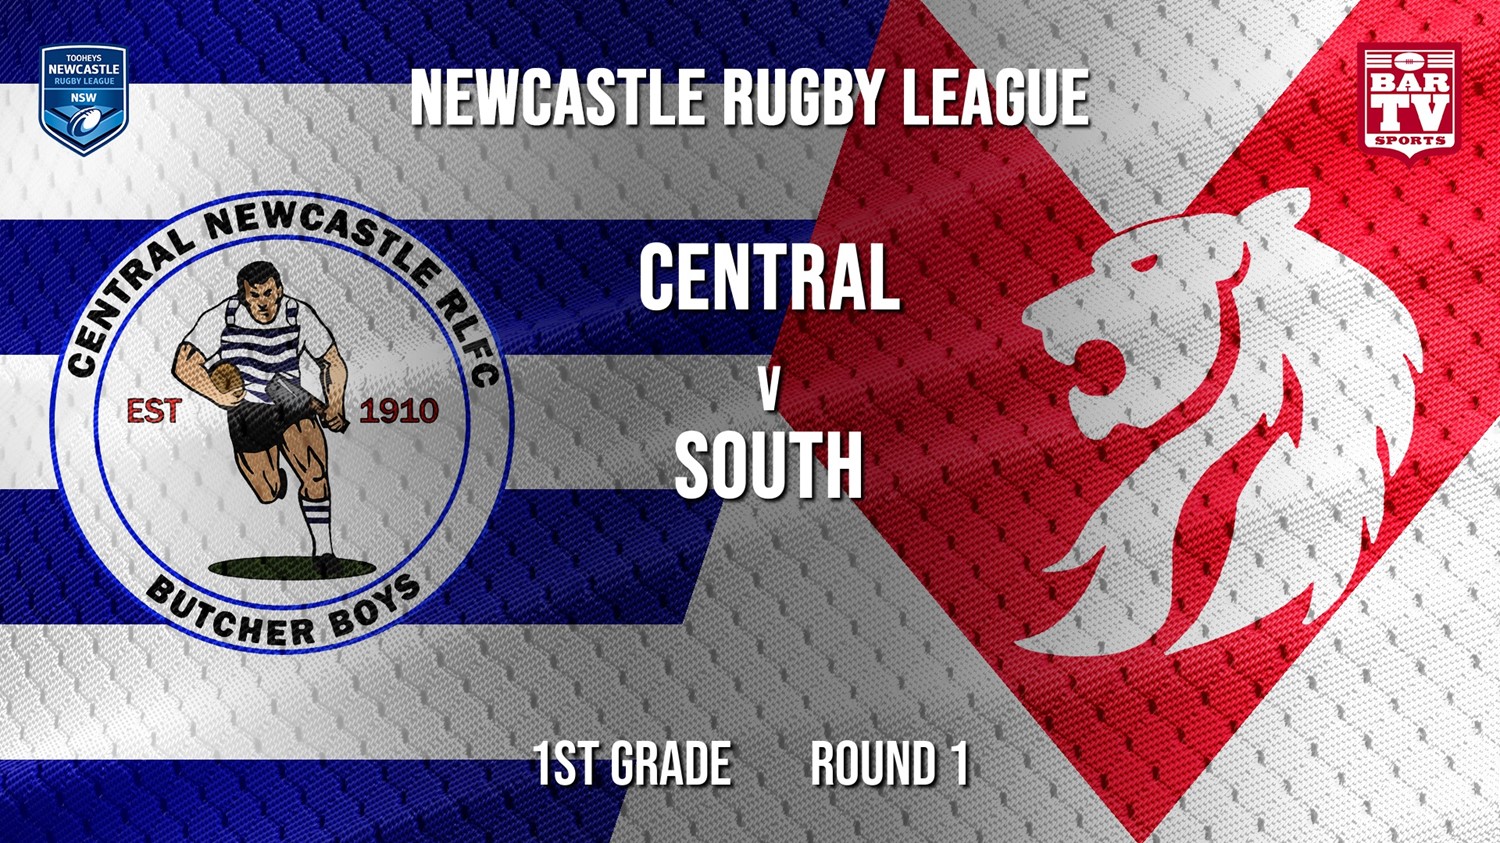 Newcastle Rugby League Round 1  - 1st Grade - Central Newcastle v South Newcastle Minigame Slate Image